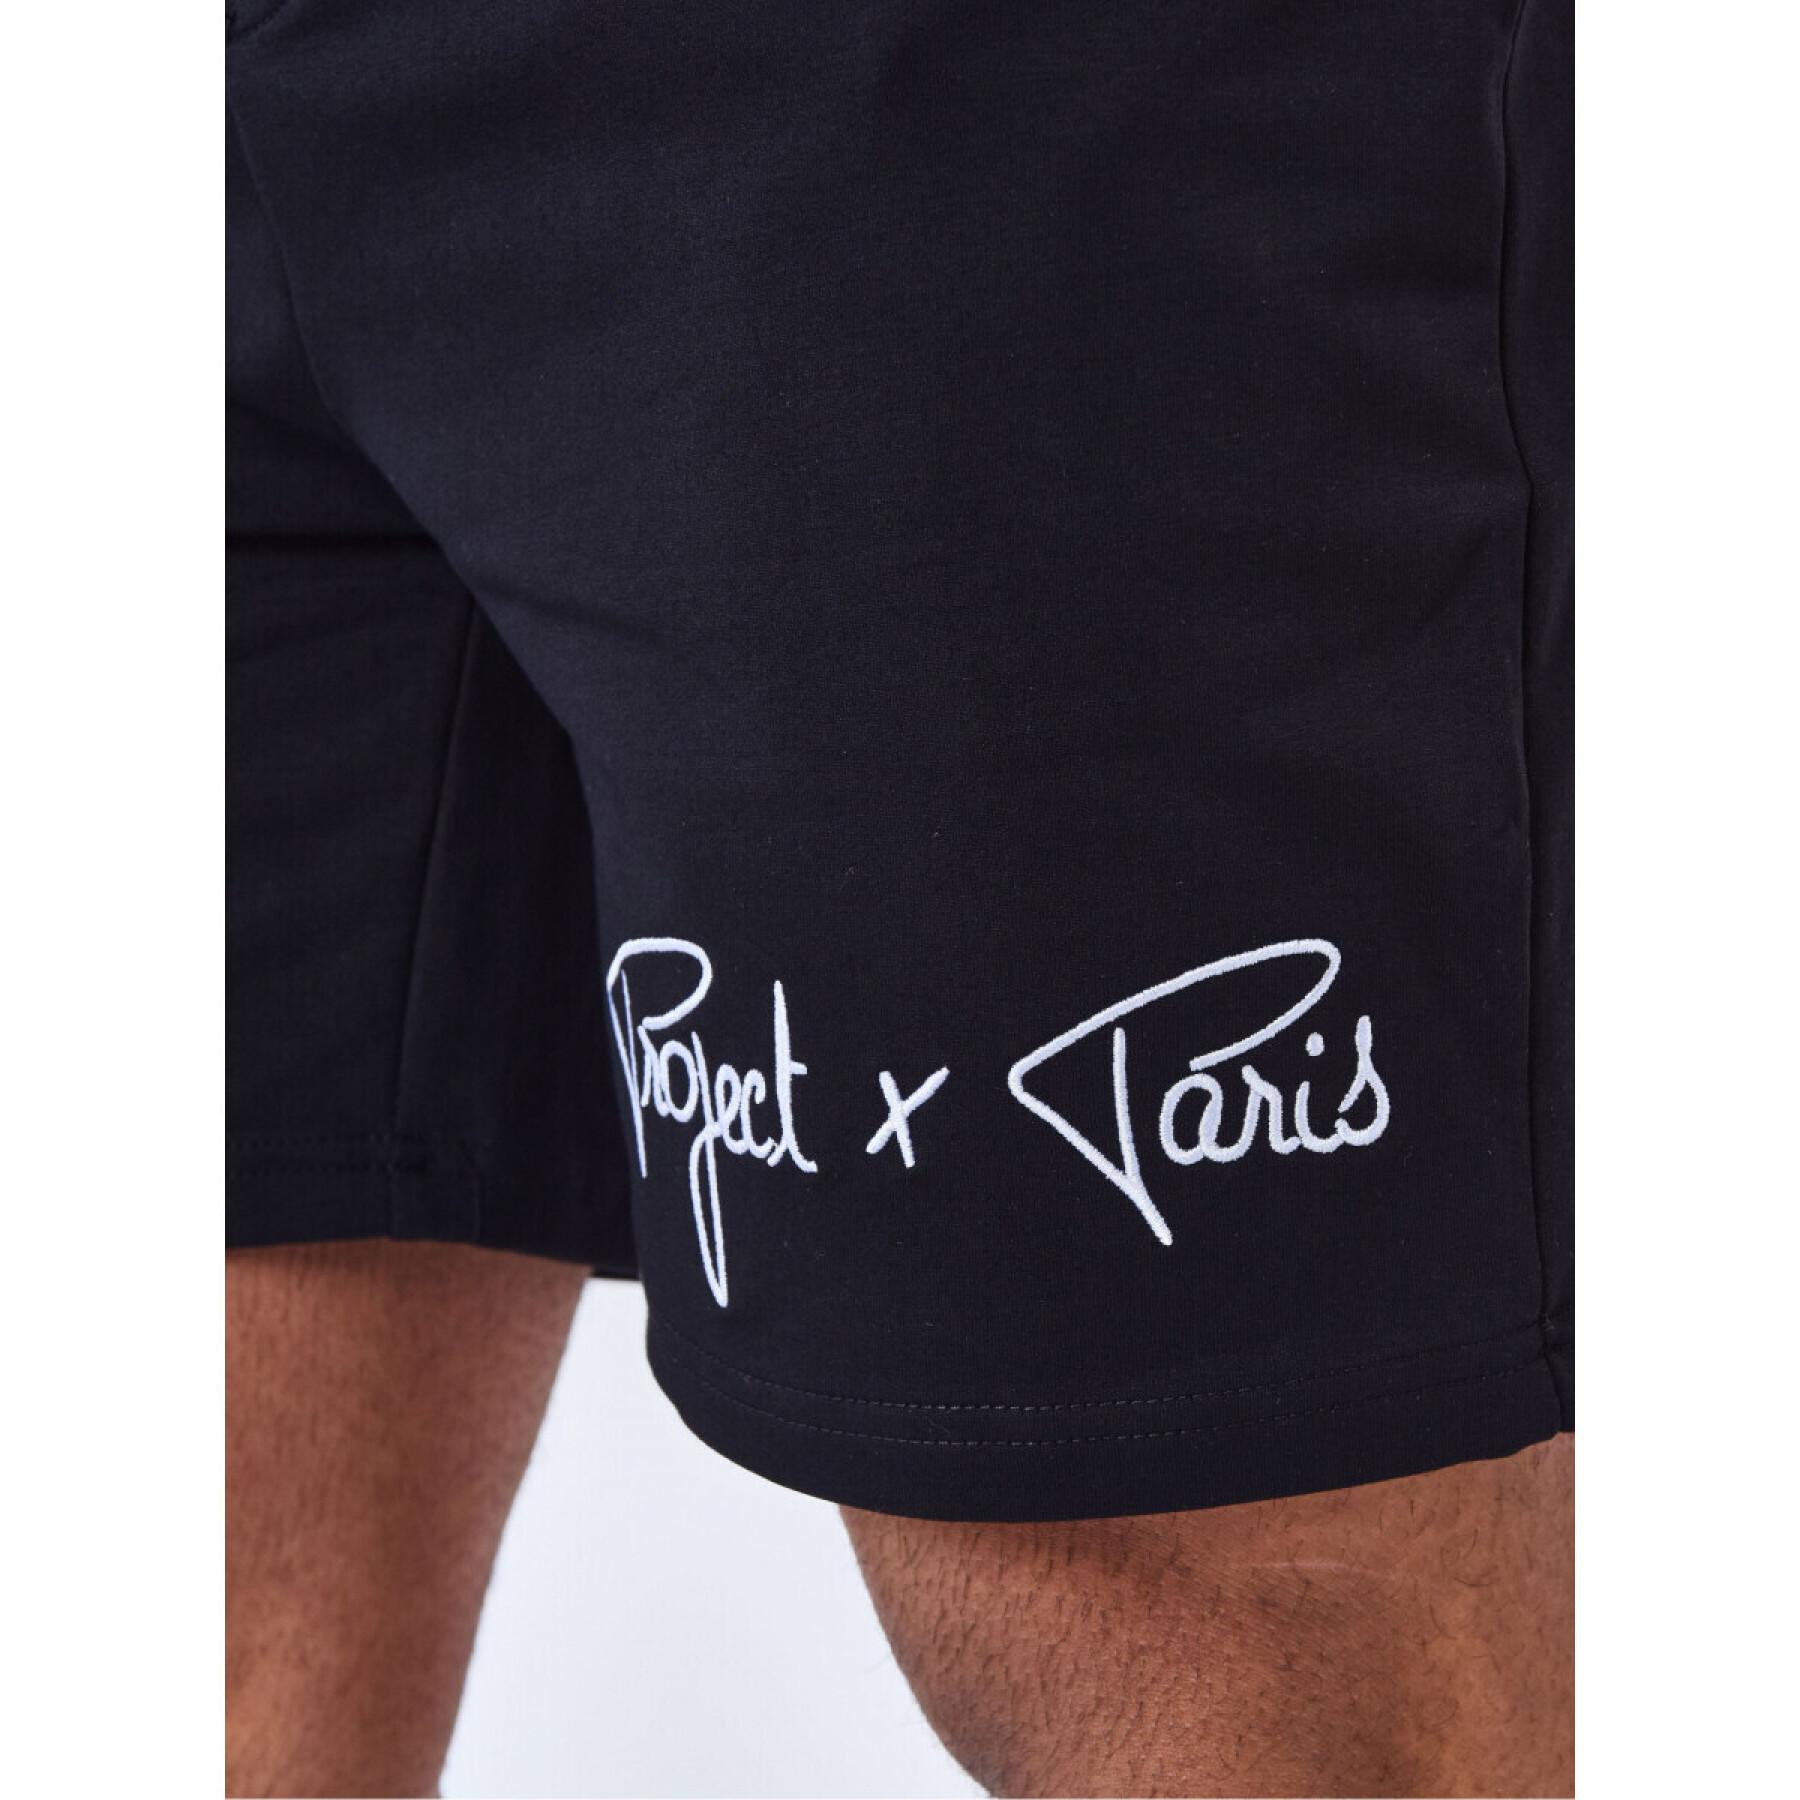 Basic shorts with embroidered logo Project X Paris